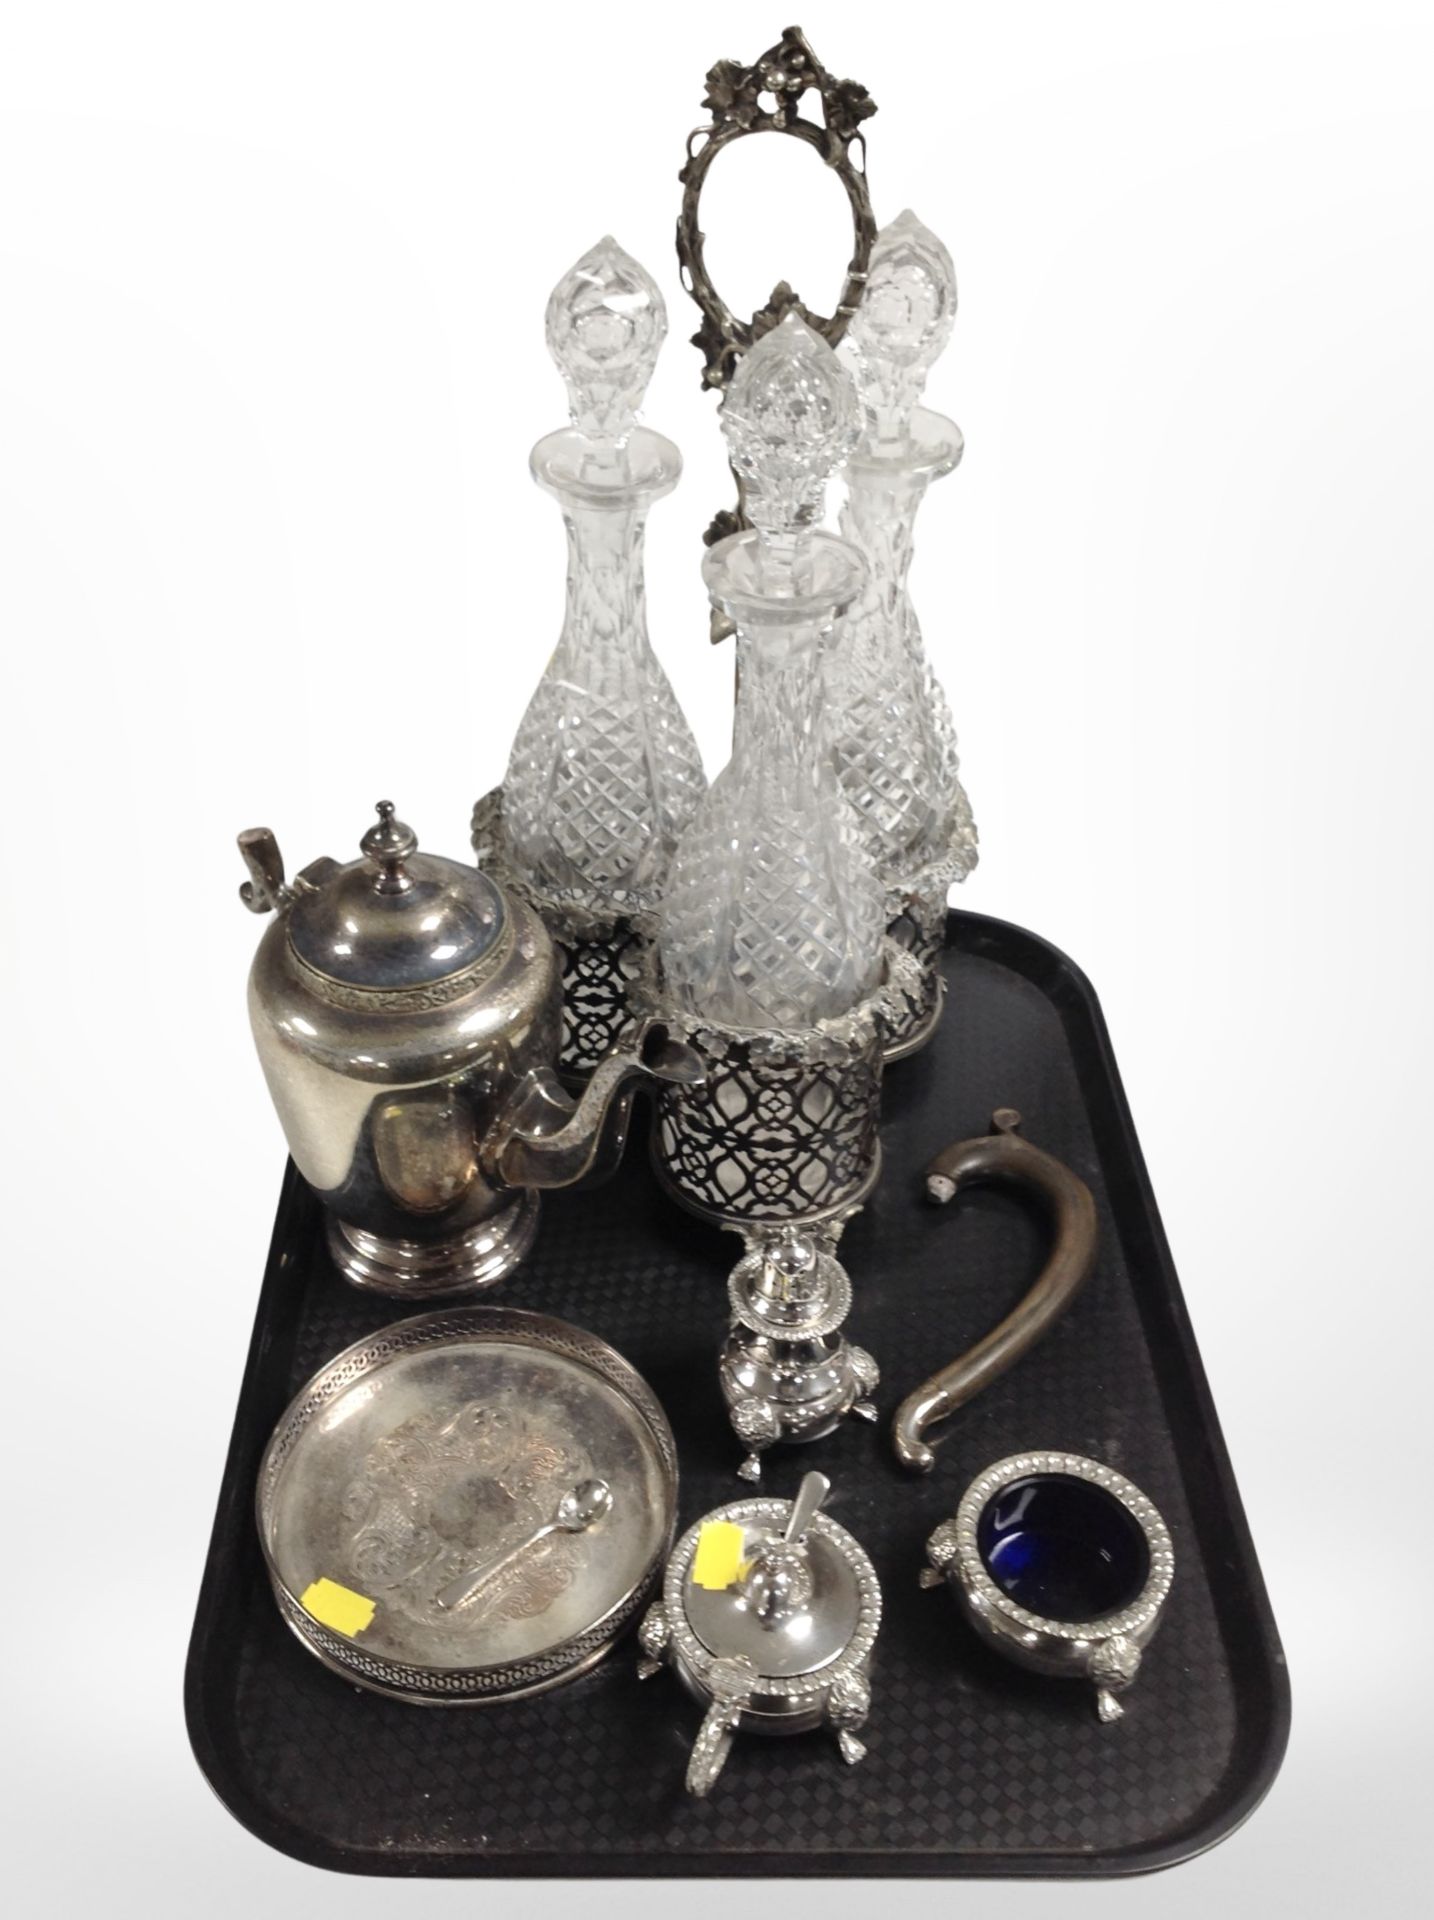 An ornate 19th-century silver-plated bottle cruet containing a set of three cut-glass decanters